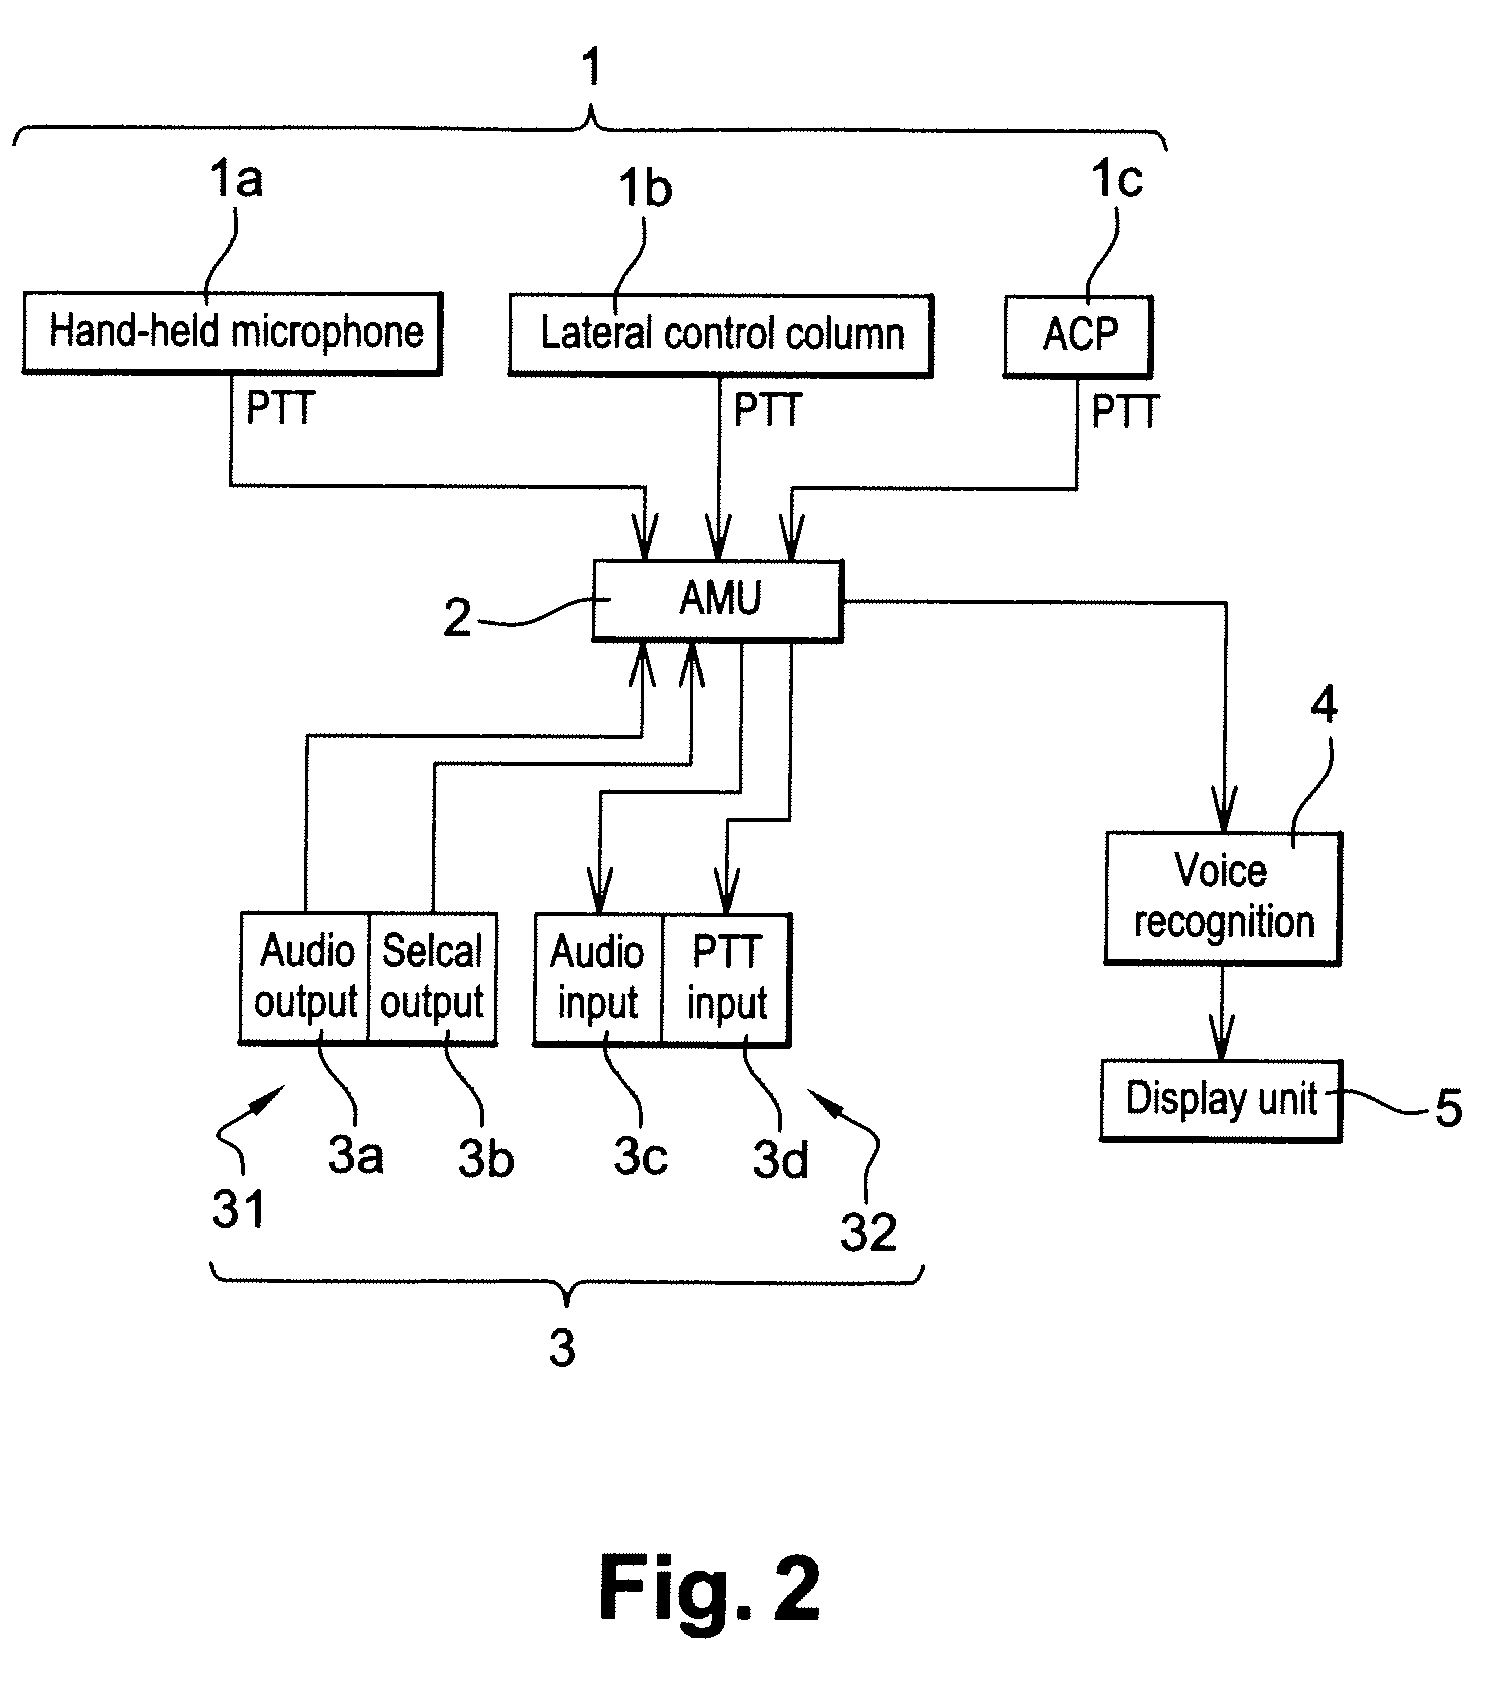 Method and system for the entry of flight data for an aircraft, transmitted between a crew on board the aircraft and ground staff